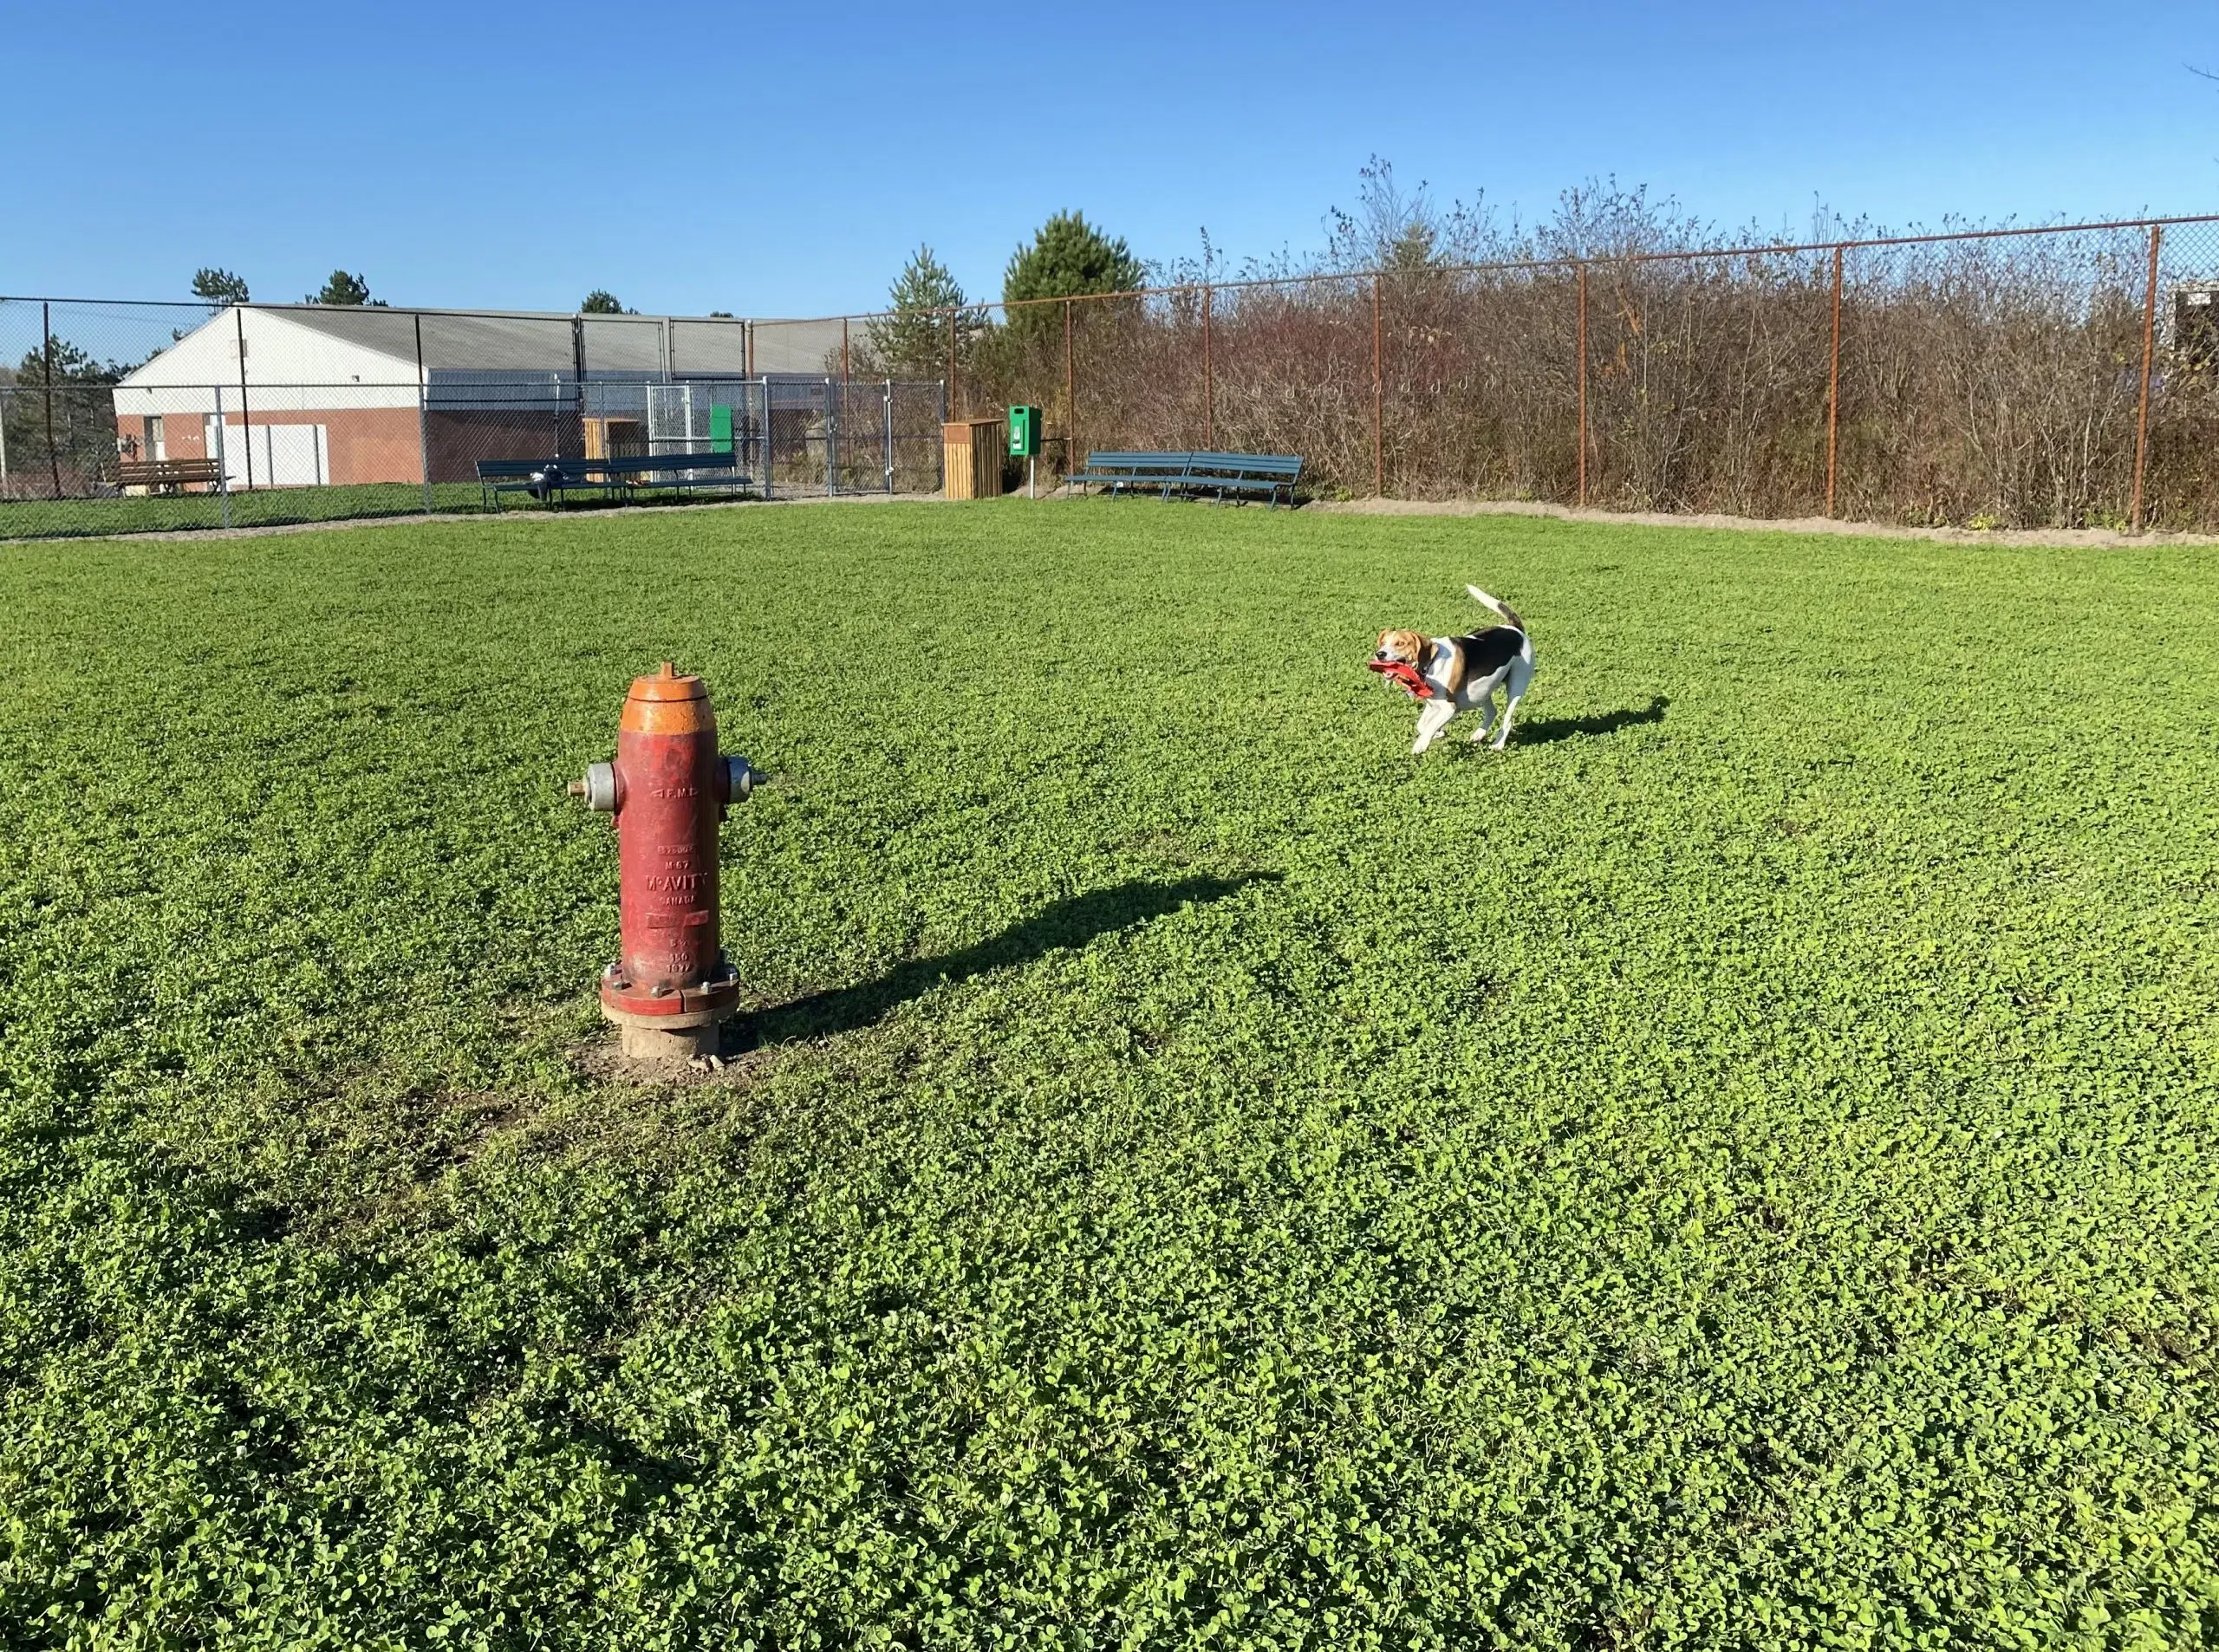 Dog Park Now Located On City's West Side